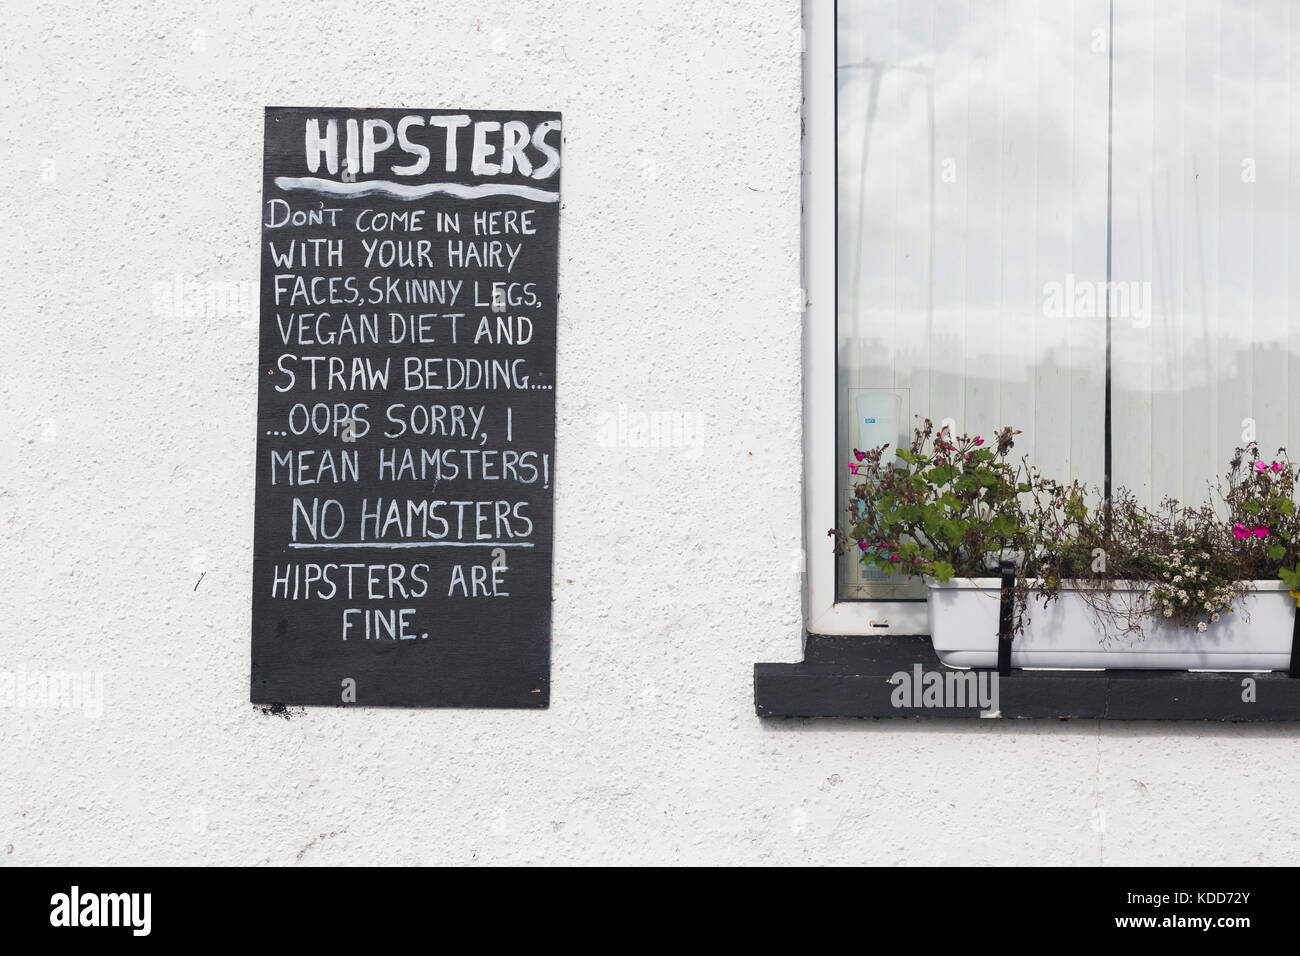 Funny sign outside pub confusing hipsters with hamsters Stock Photo - Alamy